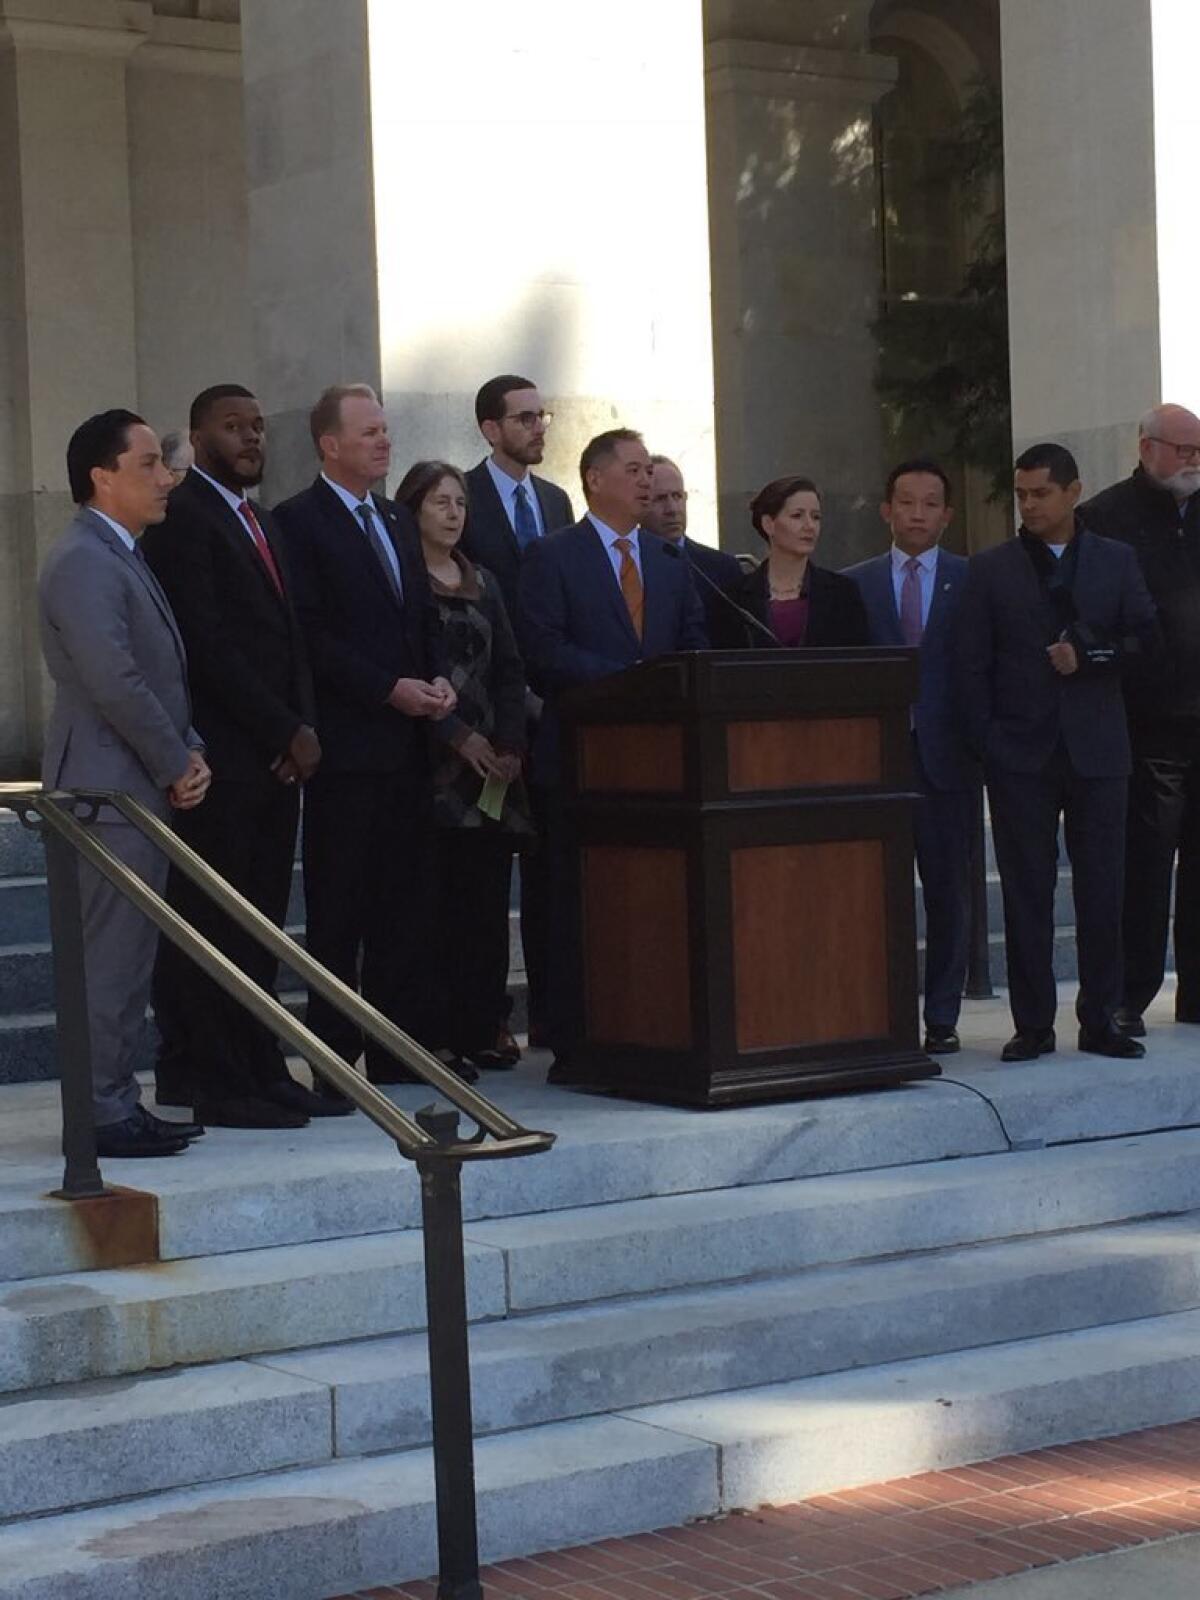 Assemblyman Phil Ting (D-San Francisco), center, joins mayors from across California to announce legislation for homelessness funding.